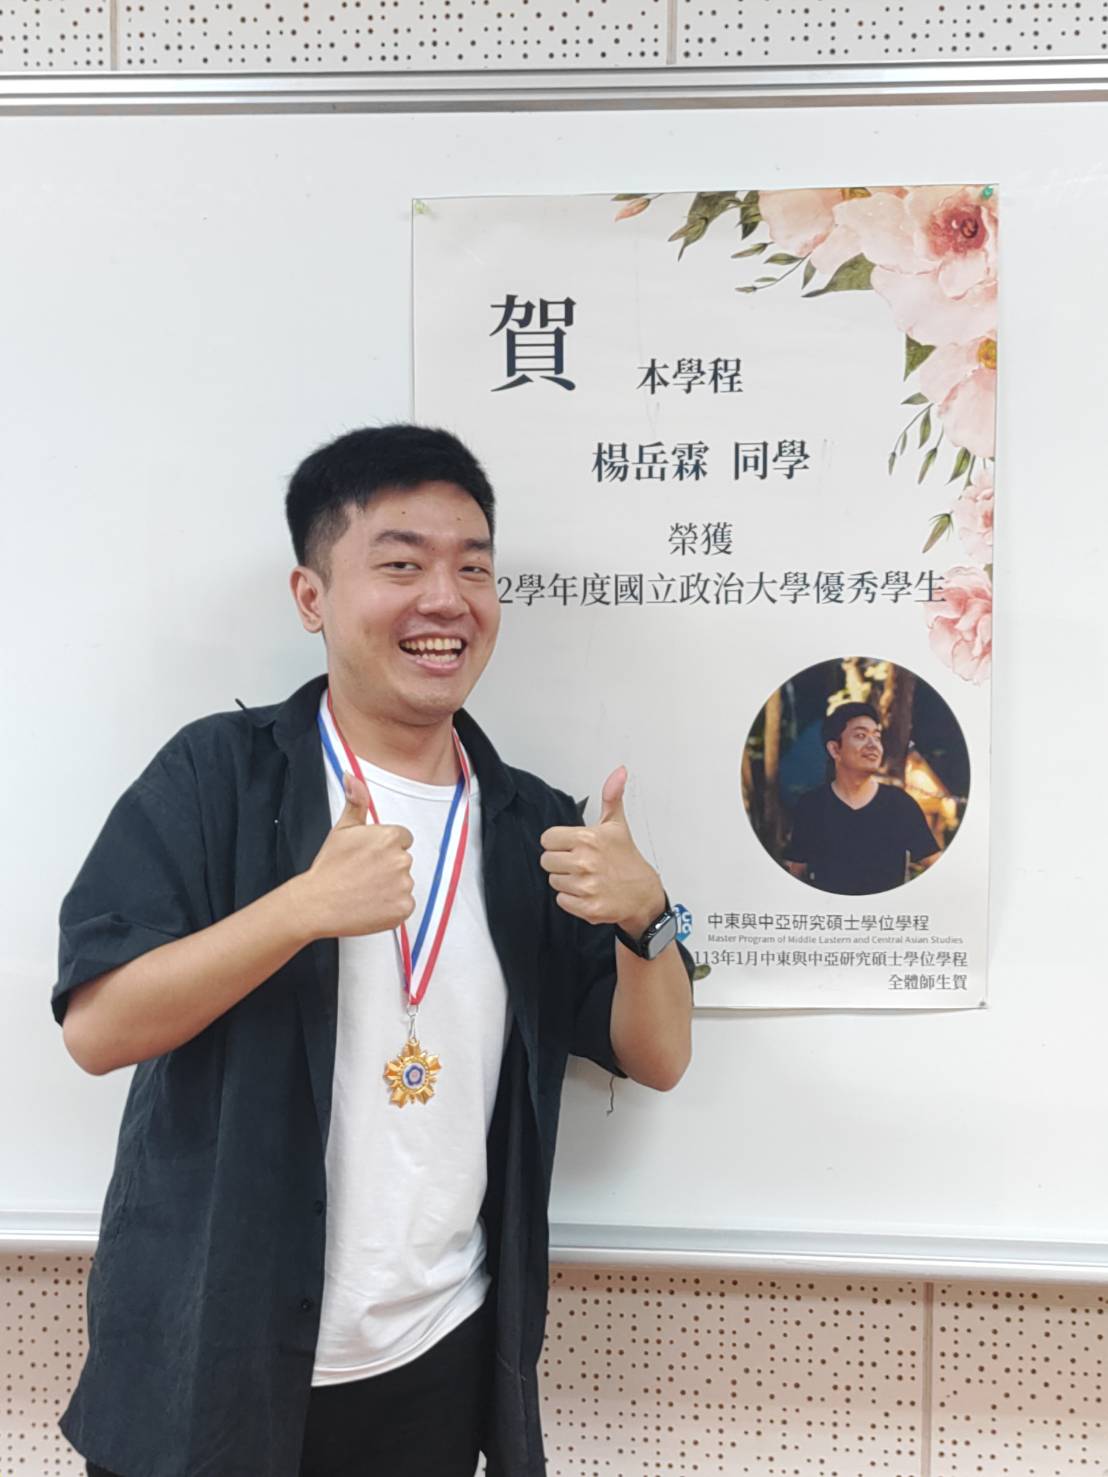 Congratulations! Yang Yuelin, a student of this program, was awarded the Outstanding Student of National Chengchi University in the 112th academic year.